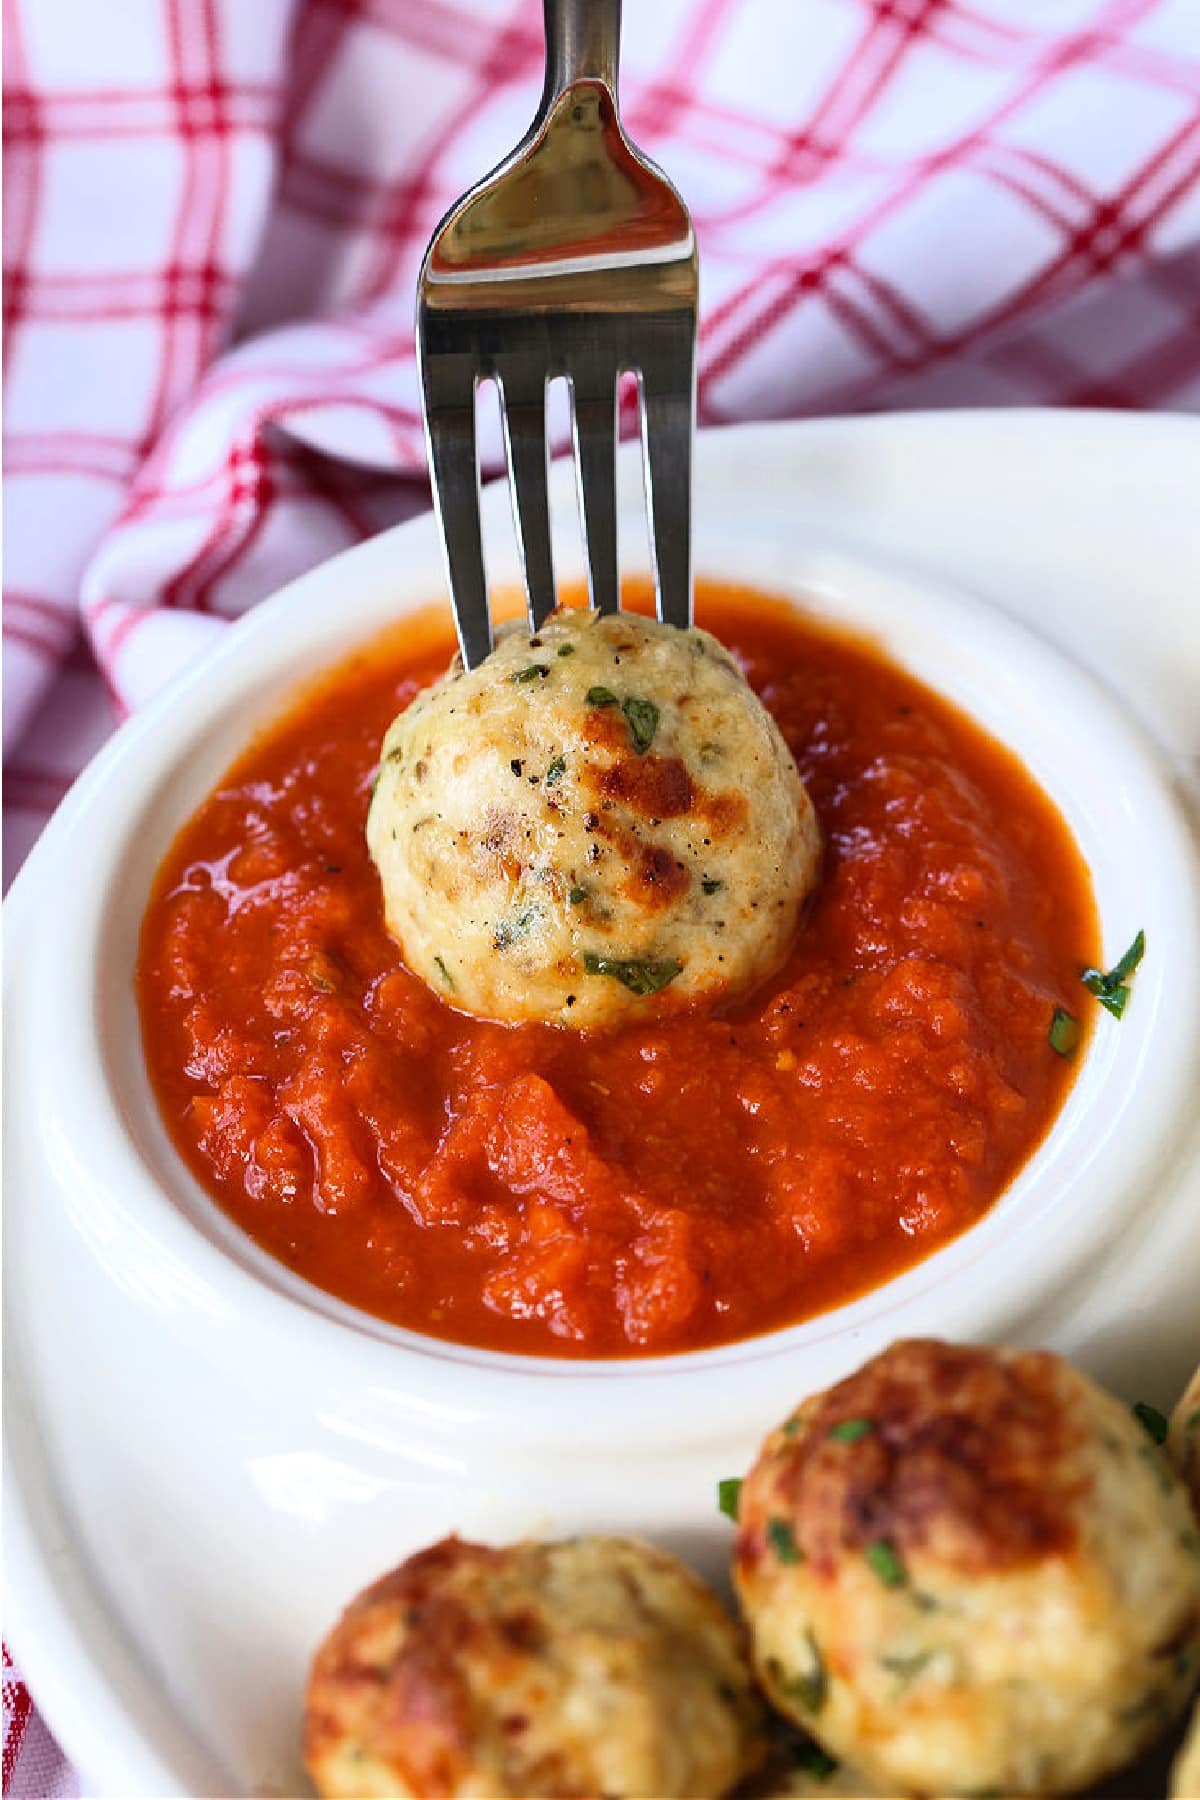 chicken meatball on a fork dipping into sauce